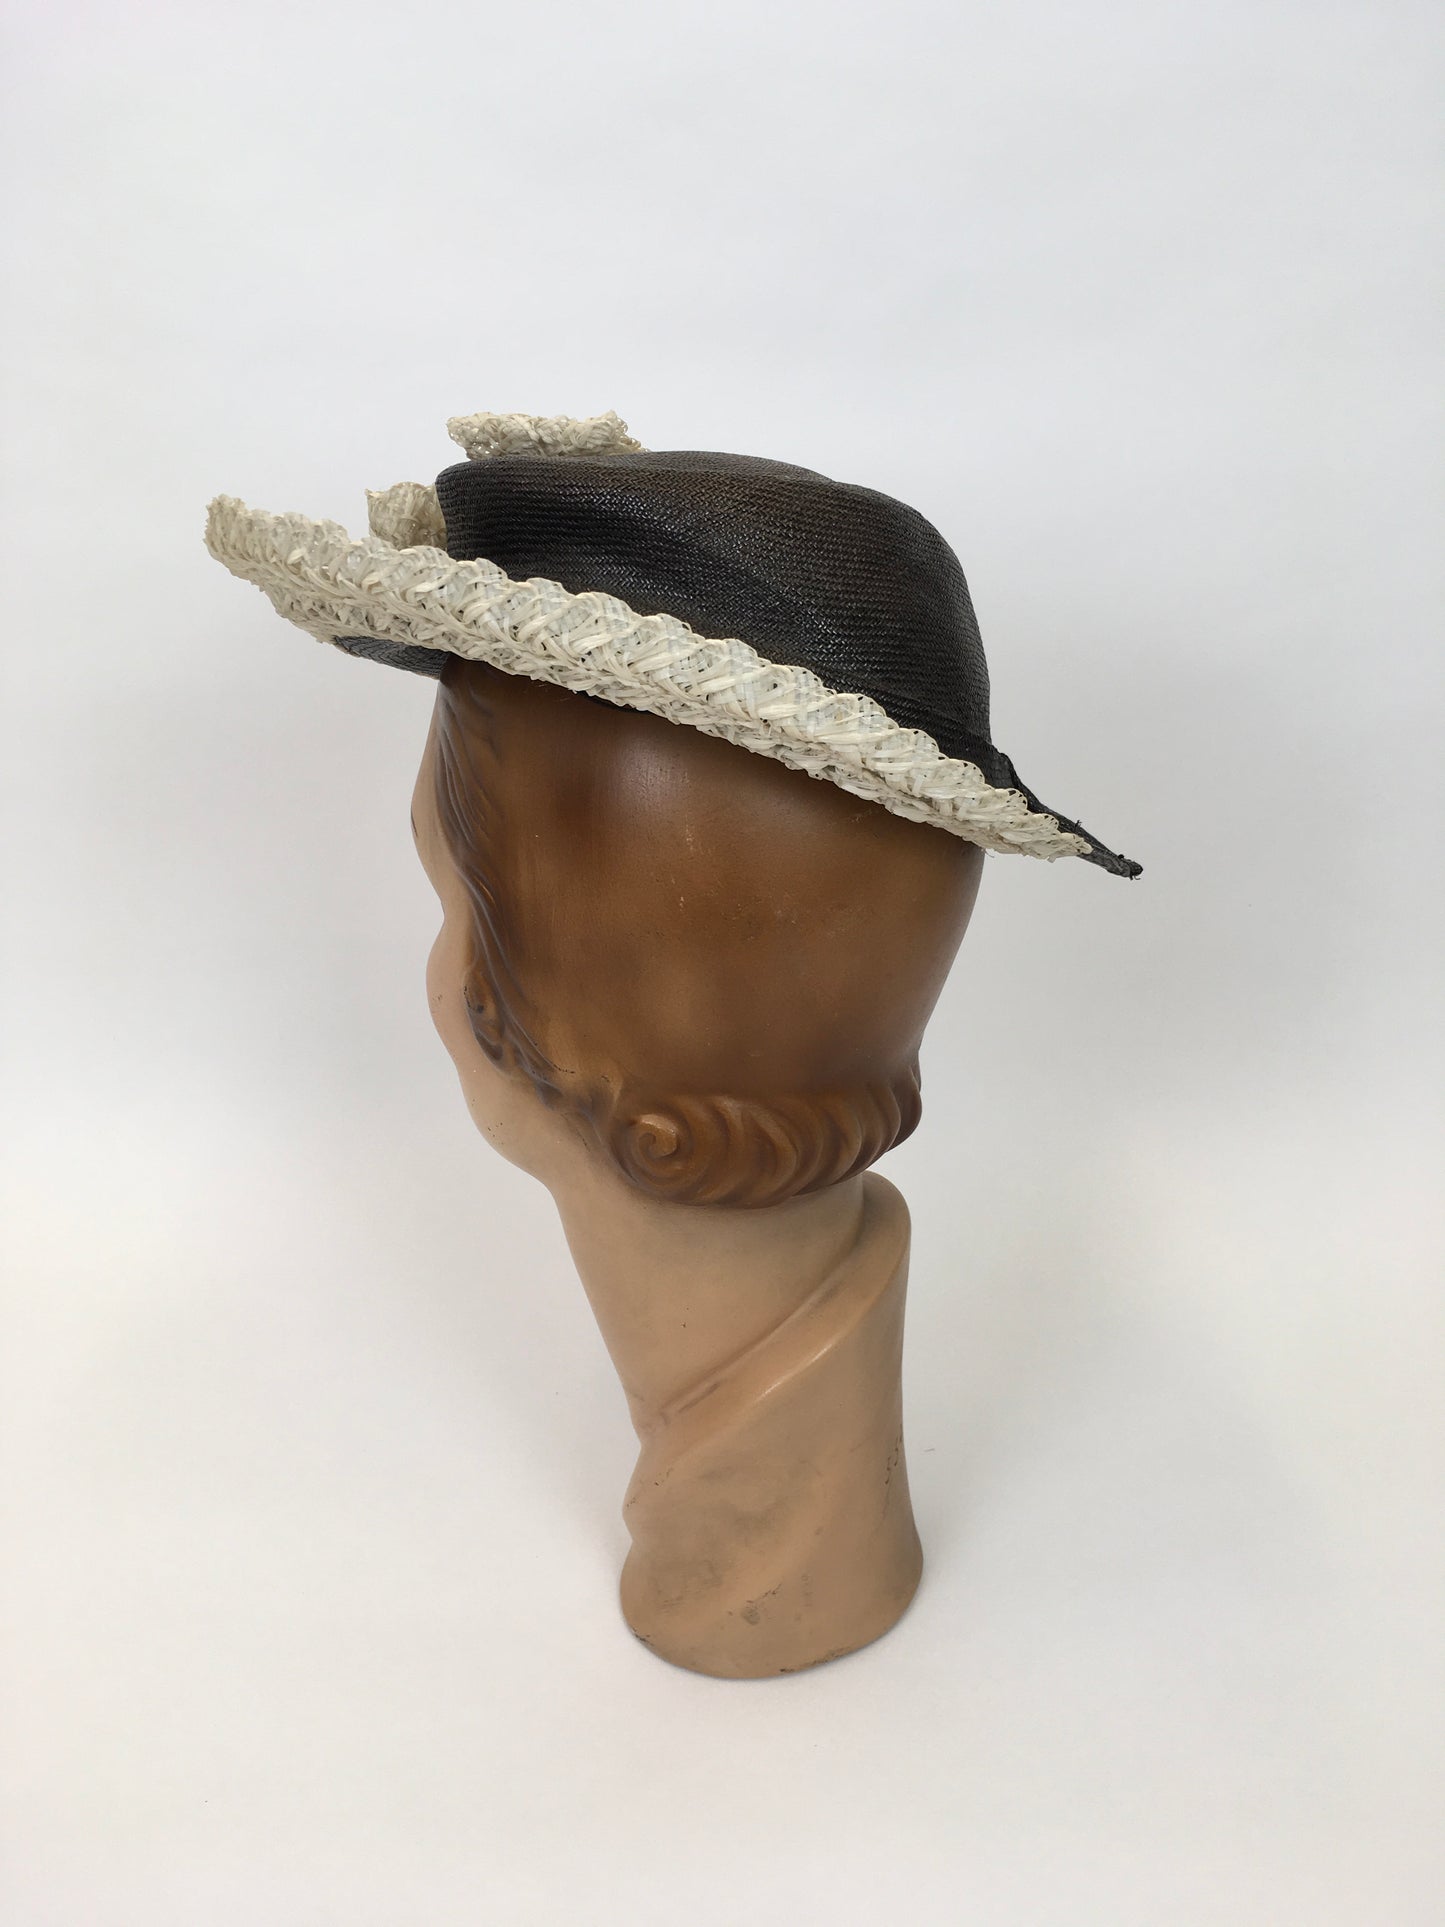 Original 1940’s Brown Grosgrain Topper Hat - With a Fabulous Cream Raffia Trim and Bow Detailing